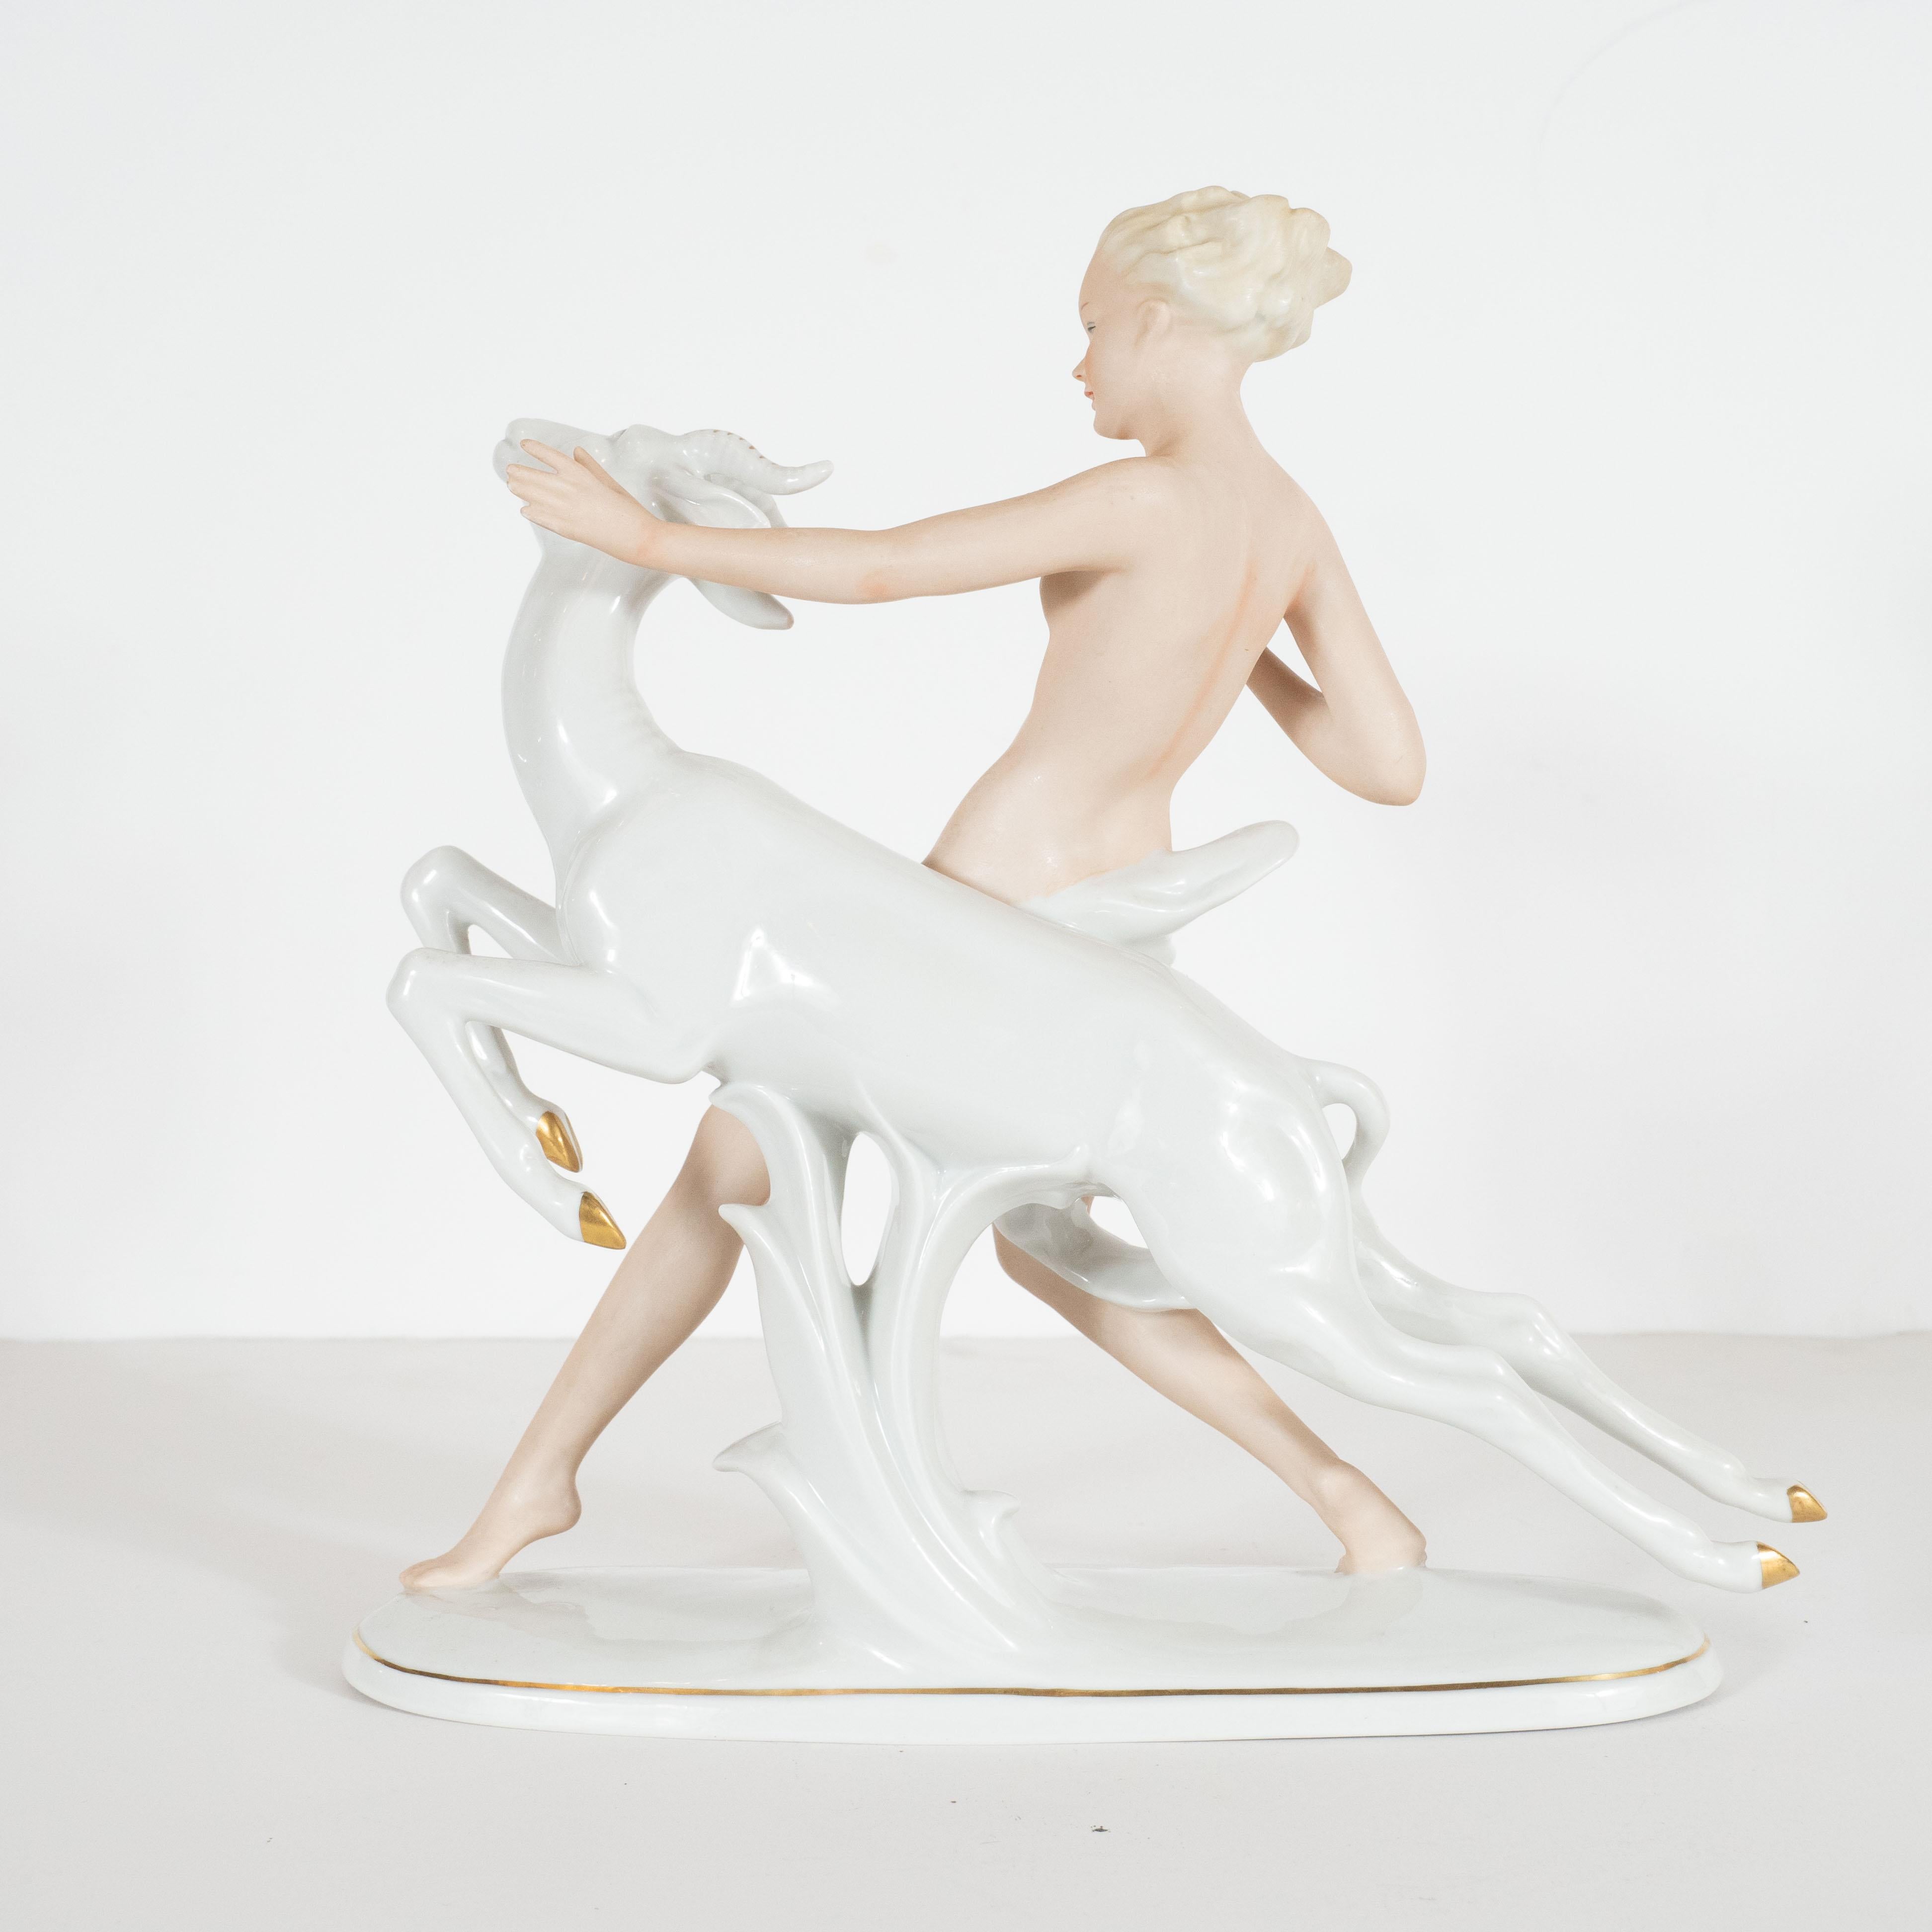 Art Deco Porcelain Statue of Female Figure with Leaping Ibex by Wallendorfer For Sale 1